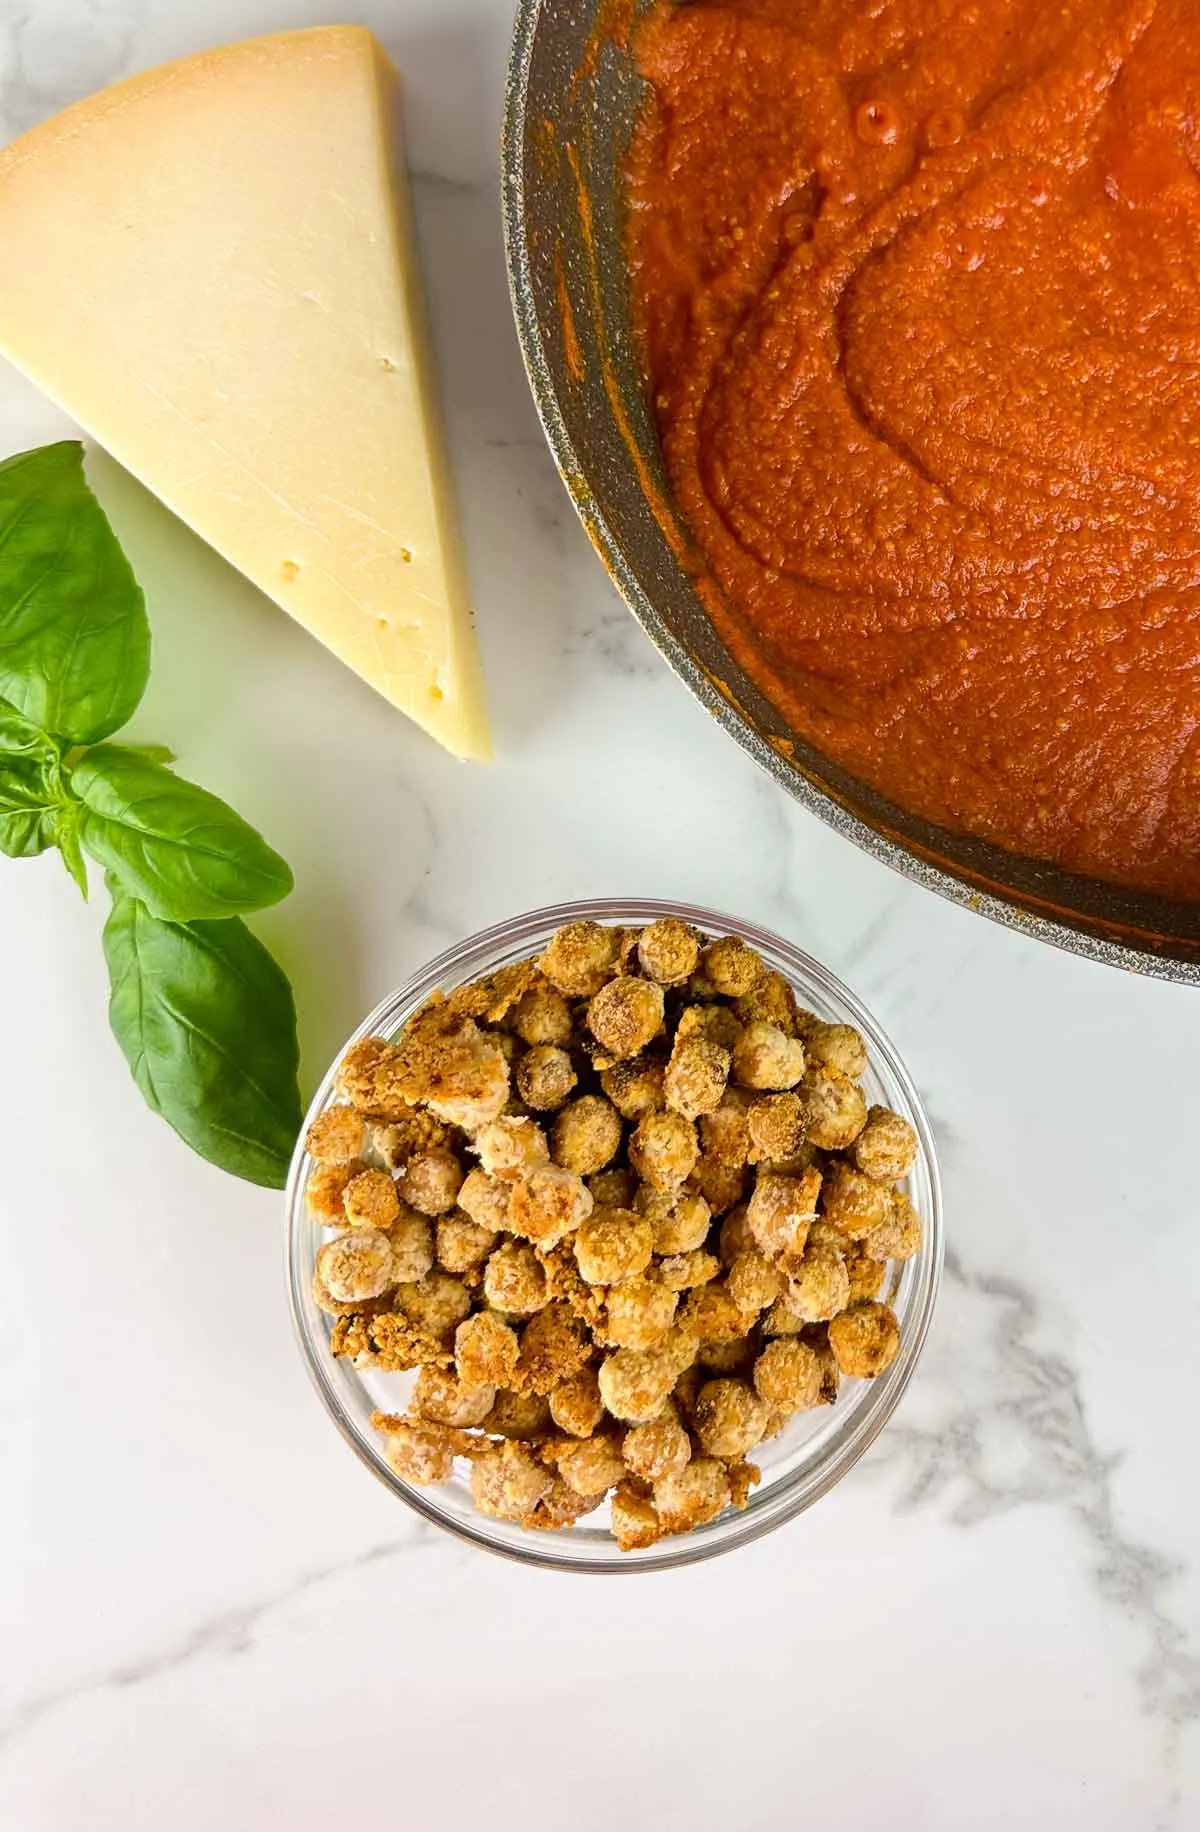 Easy garlic roasted chickpeas with parmesan are a yummy crunchy snack, and topping for salads, soups, and pastas